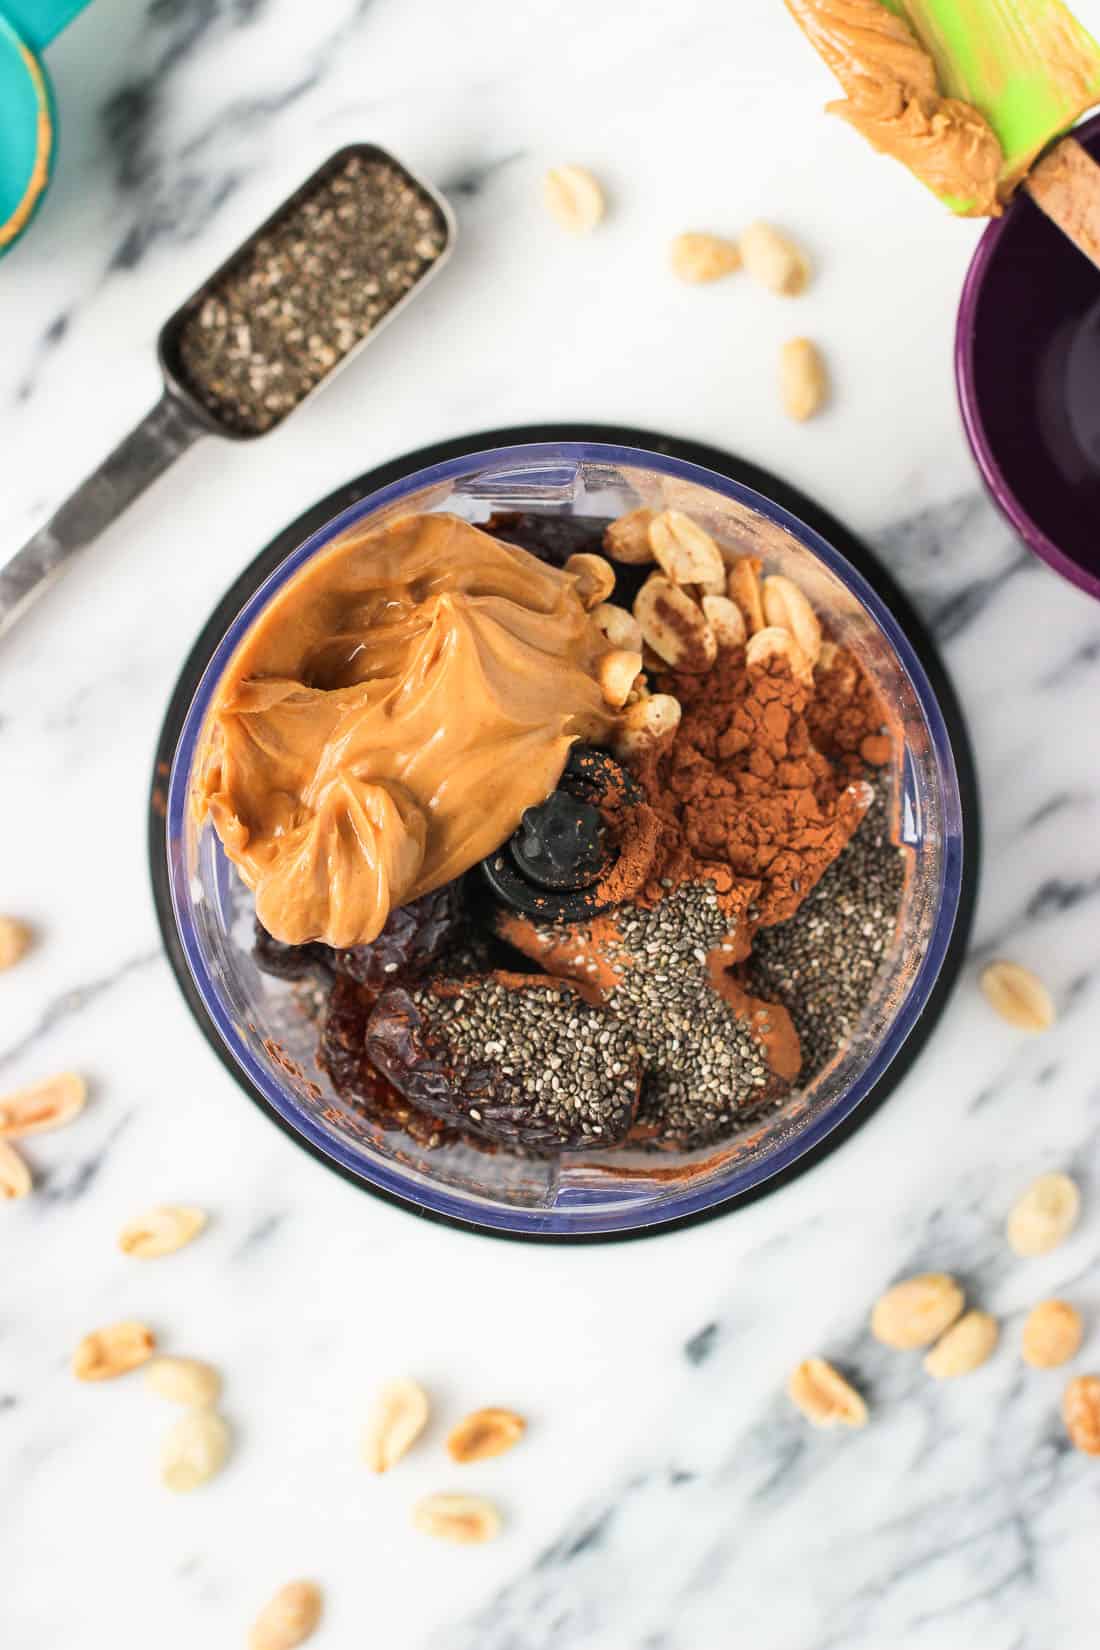 Five-ingredient Chocolate Peanut Butter Chia Bars are an easy, no-bake recipe for healthy snacking! These bars are vegan and naturally sweetened.